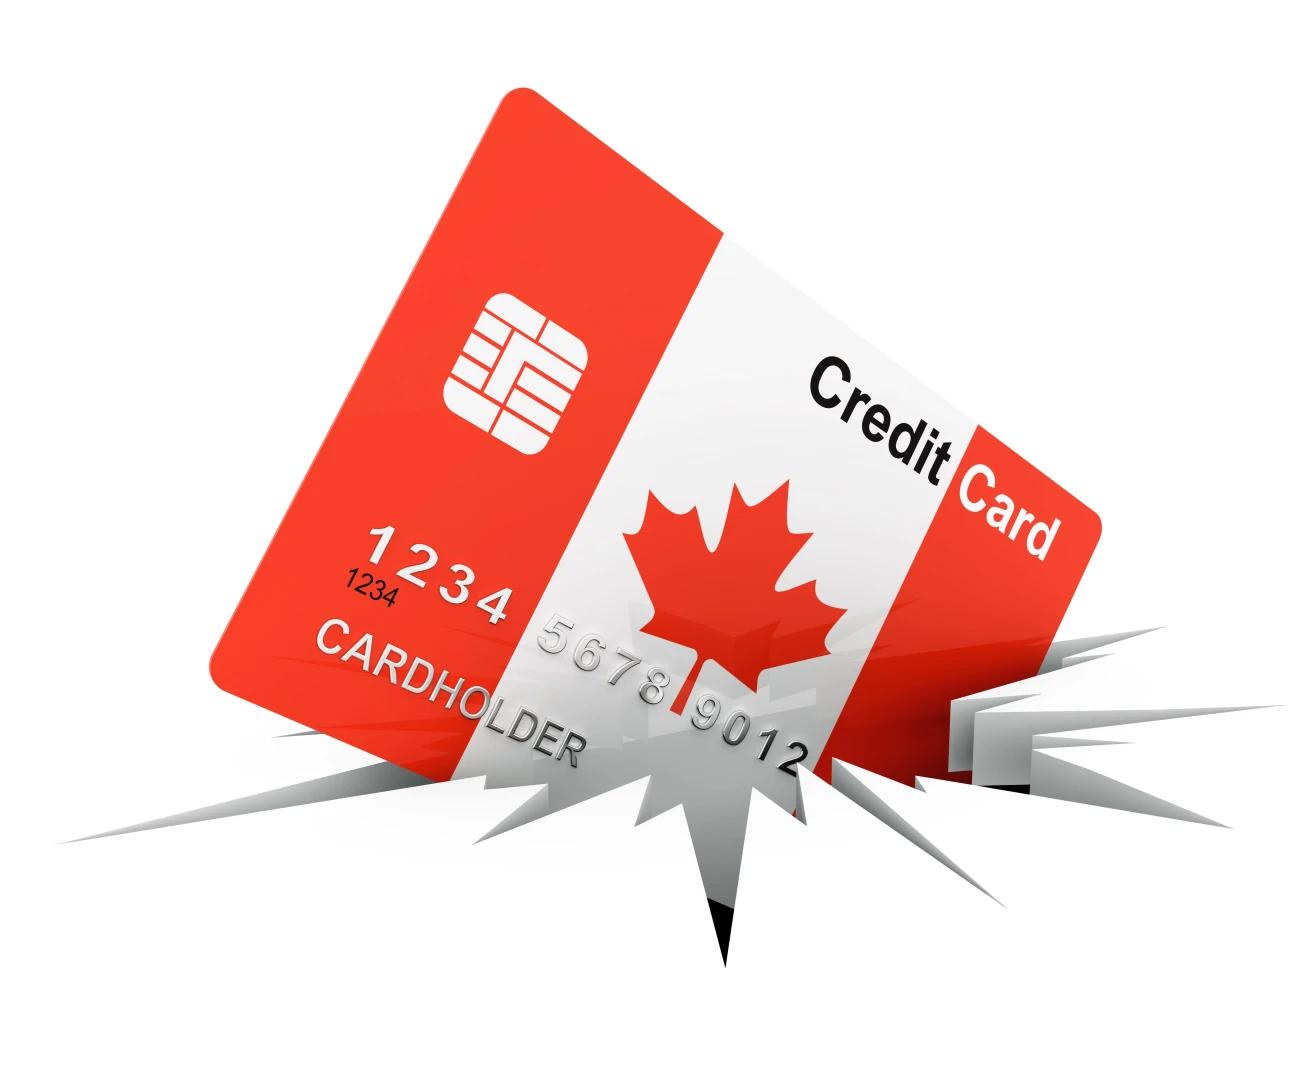 Canada’s new VISA card features carbon emissions tracker